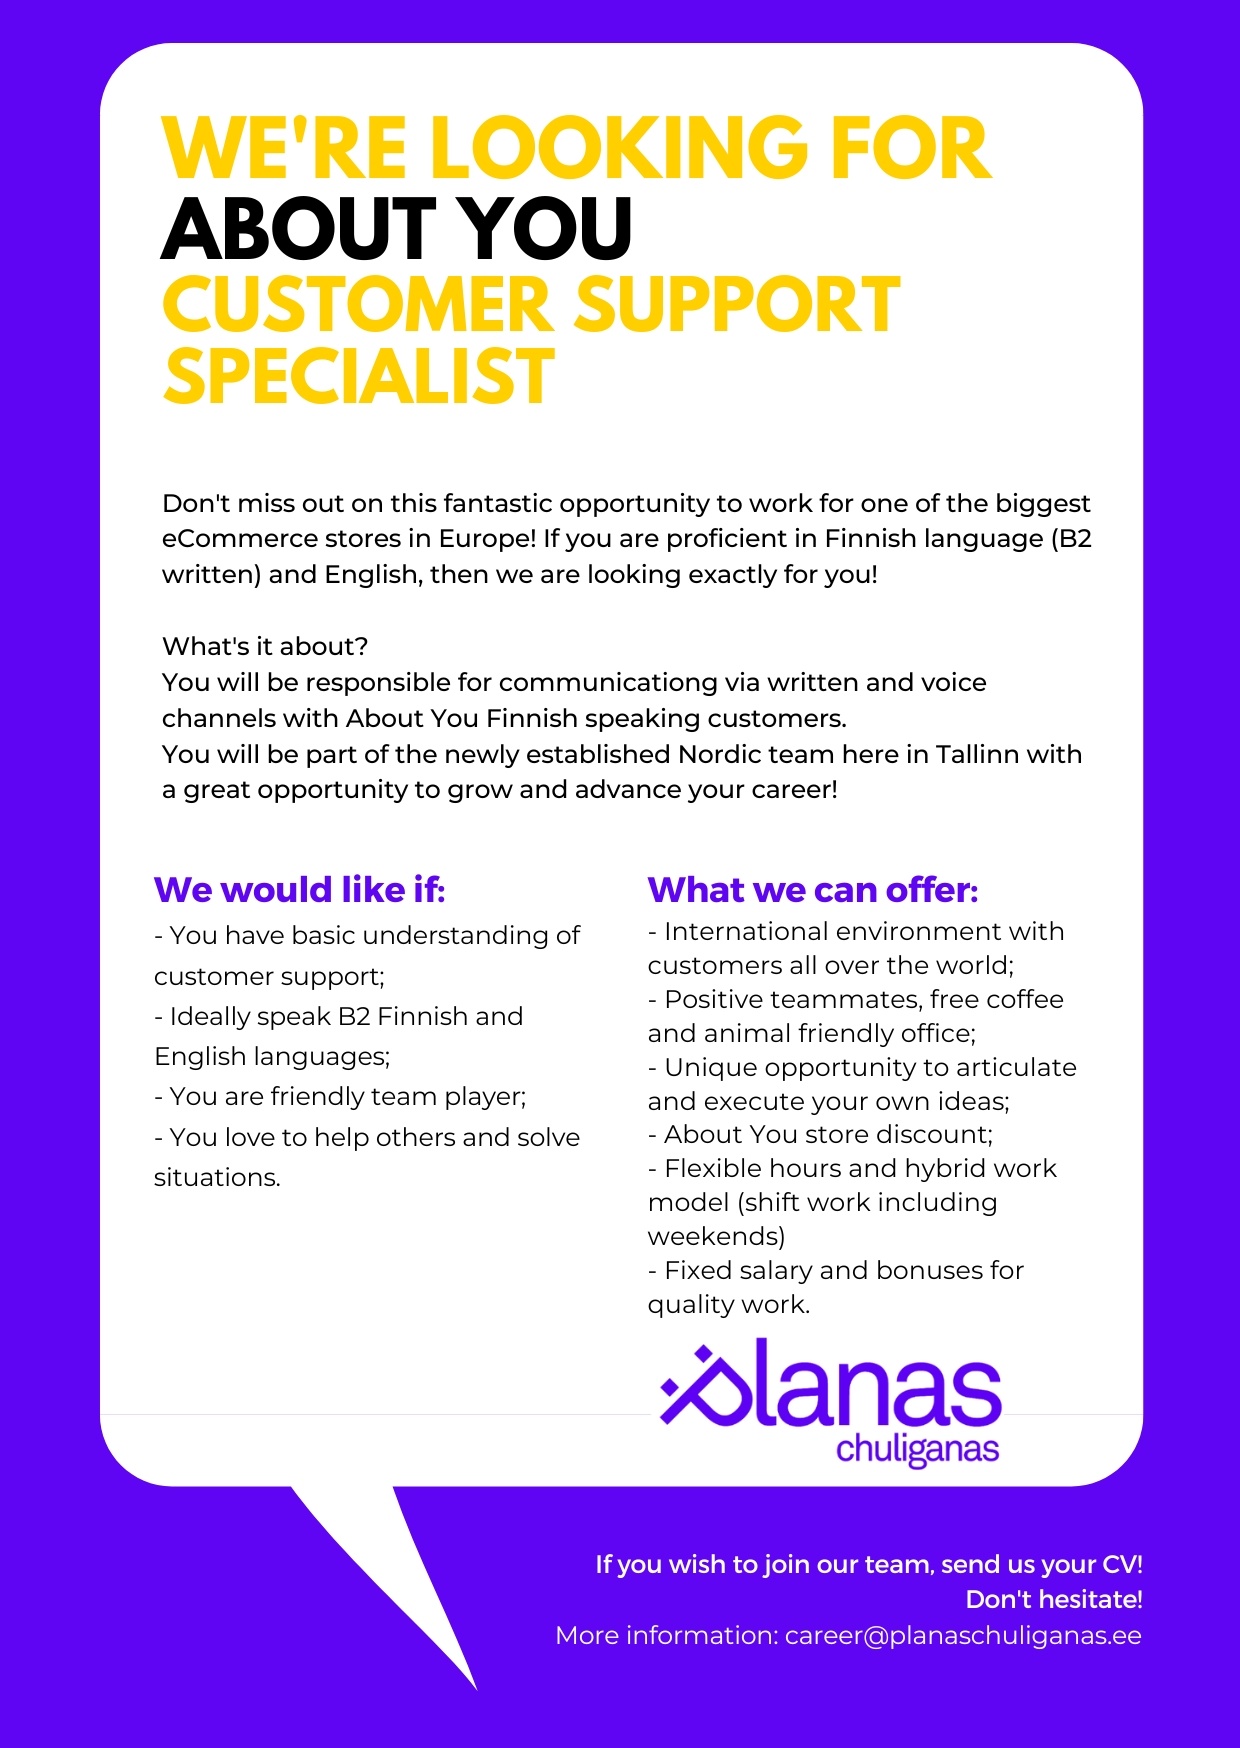 PLANAS CHULIGANAS OÜ Finnish speaking customer support representative for About You